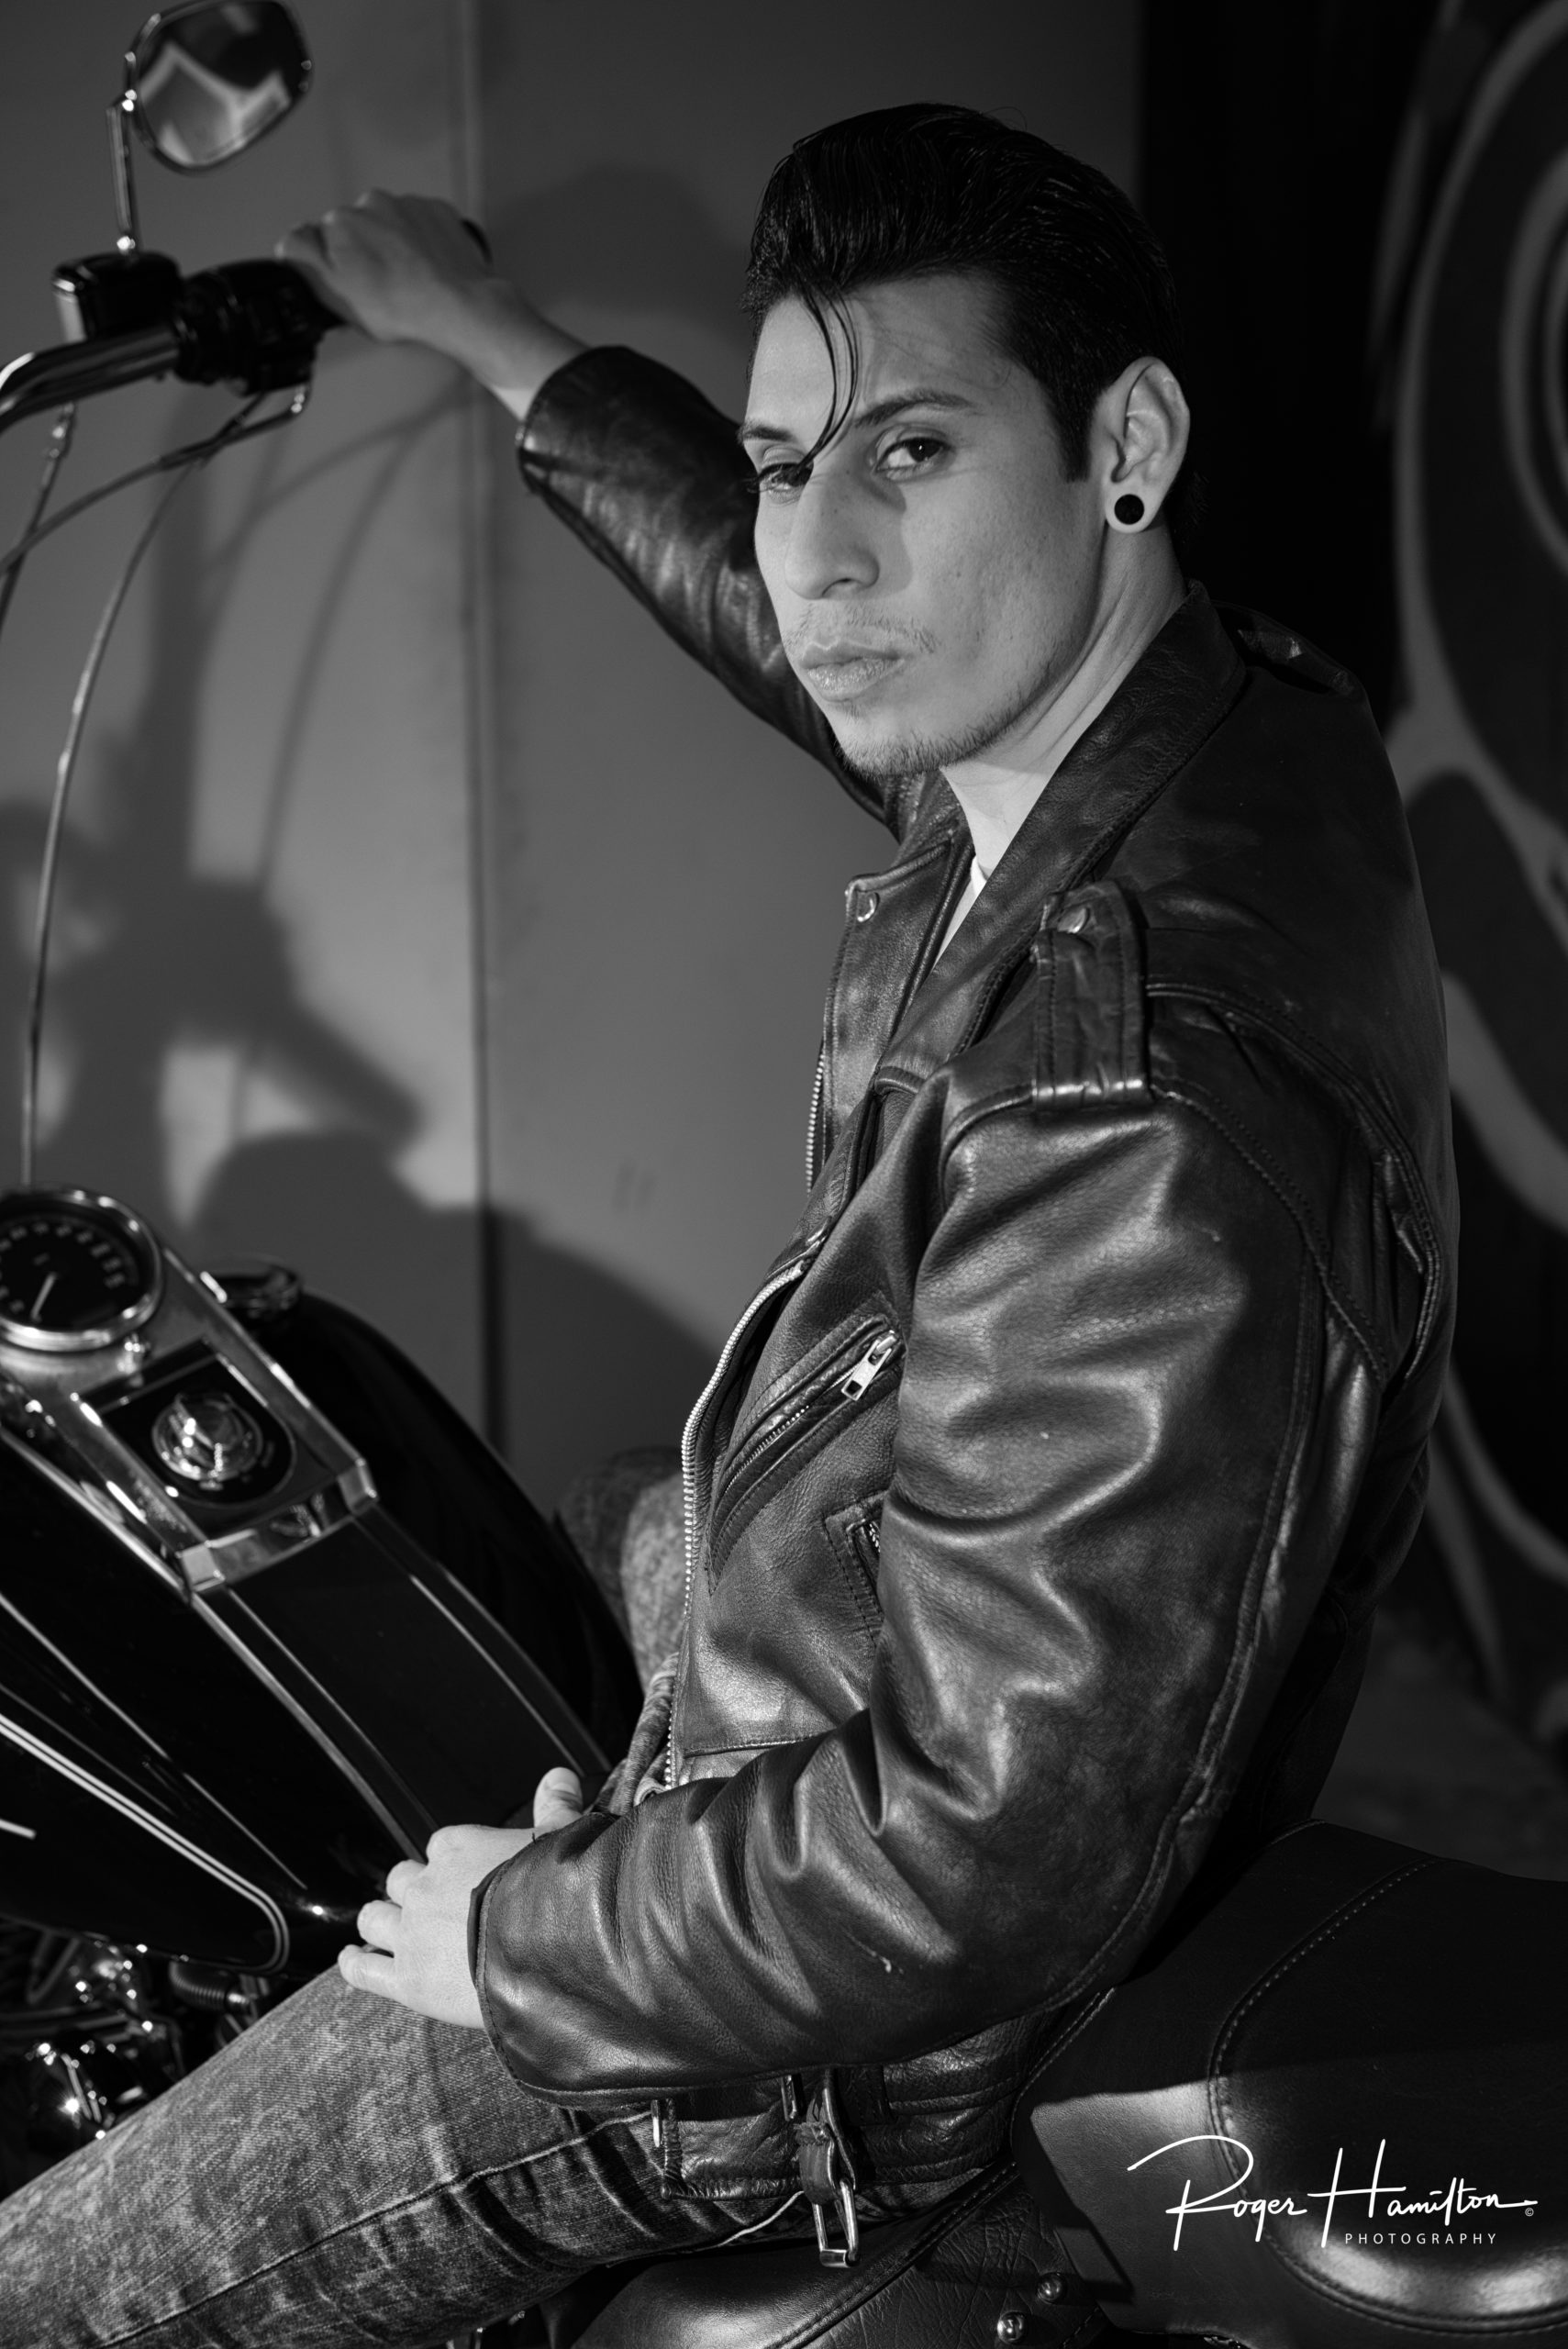 Jayson on a Harley in his Rockabilly style